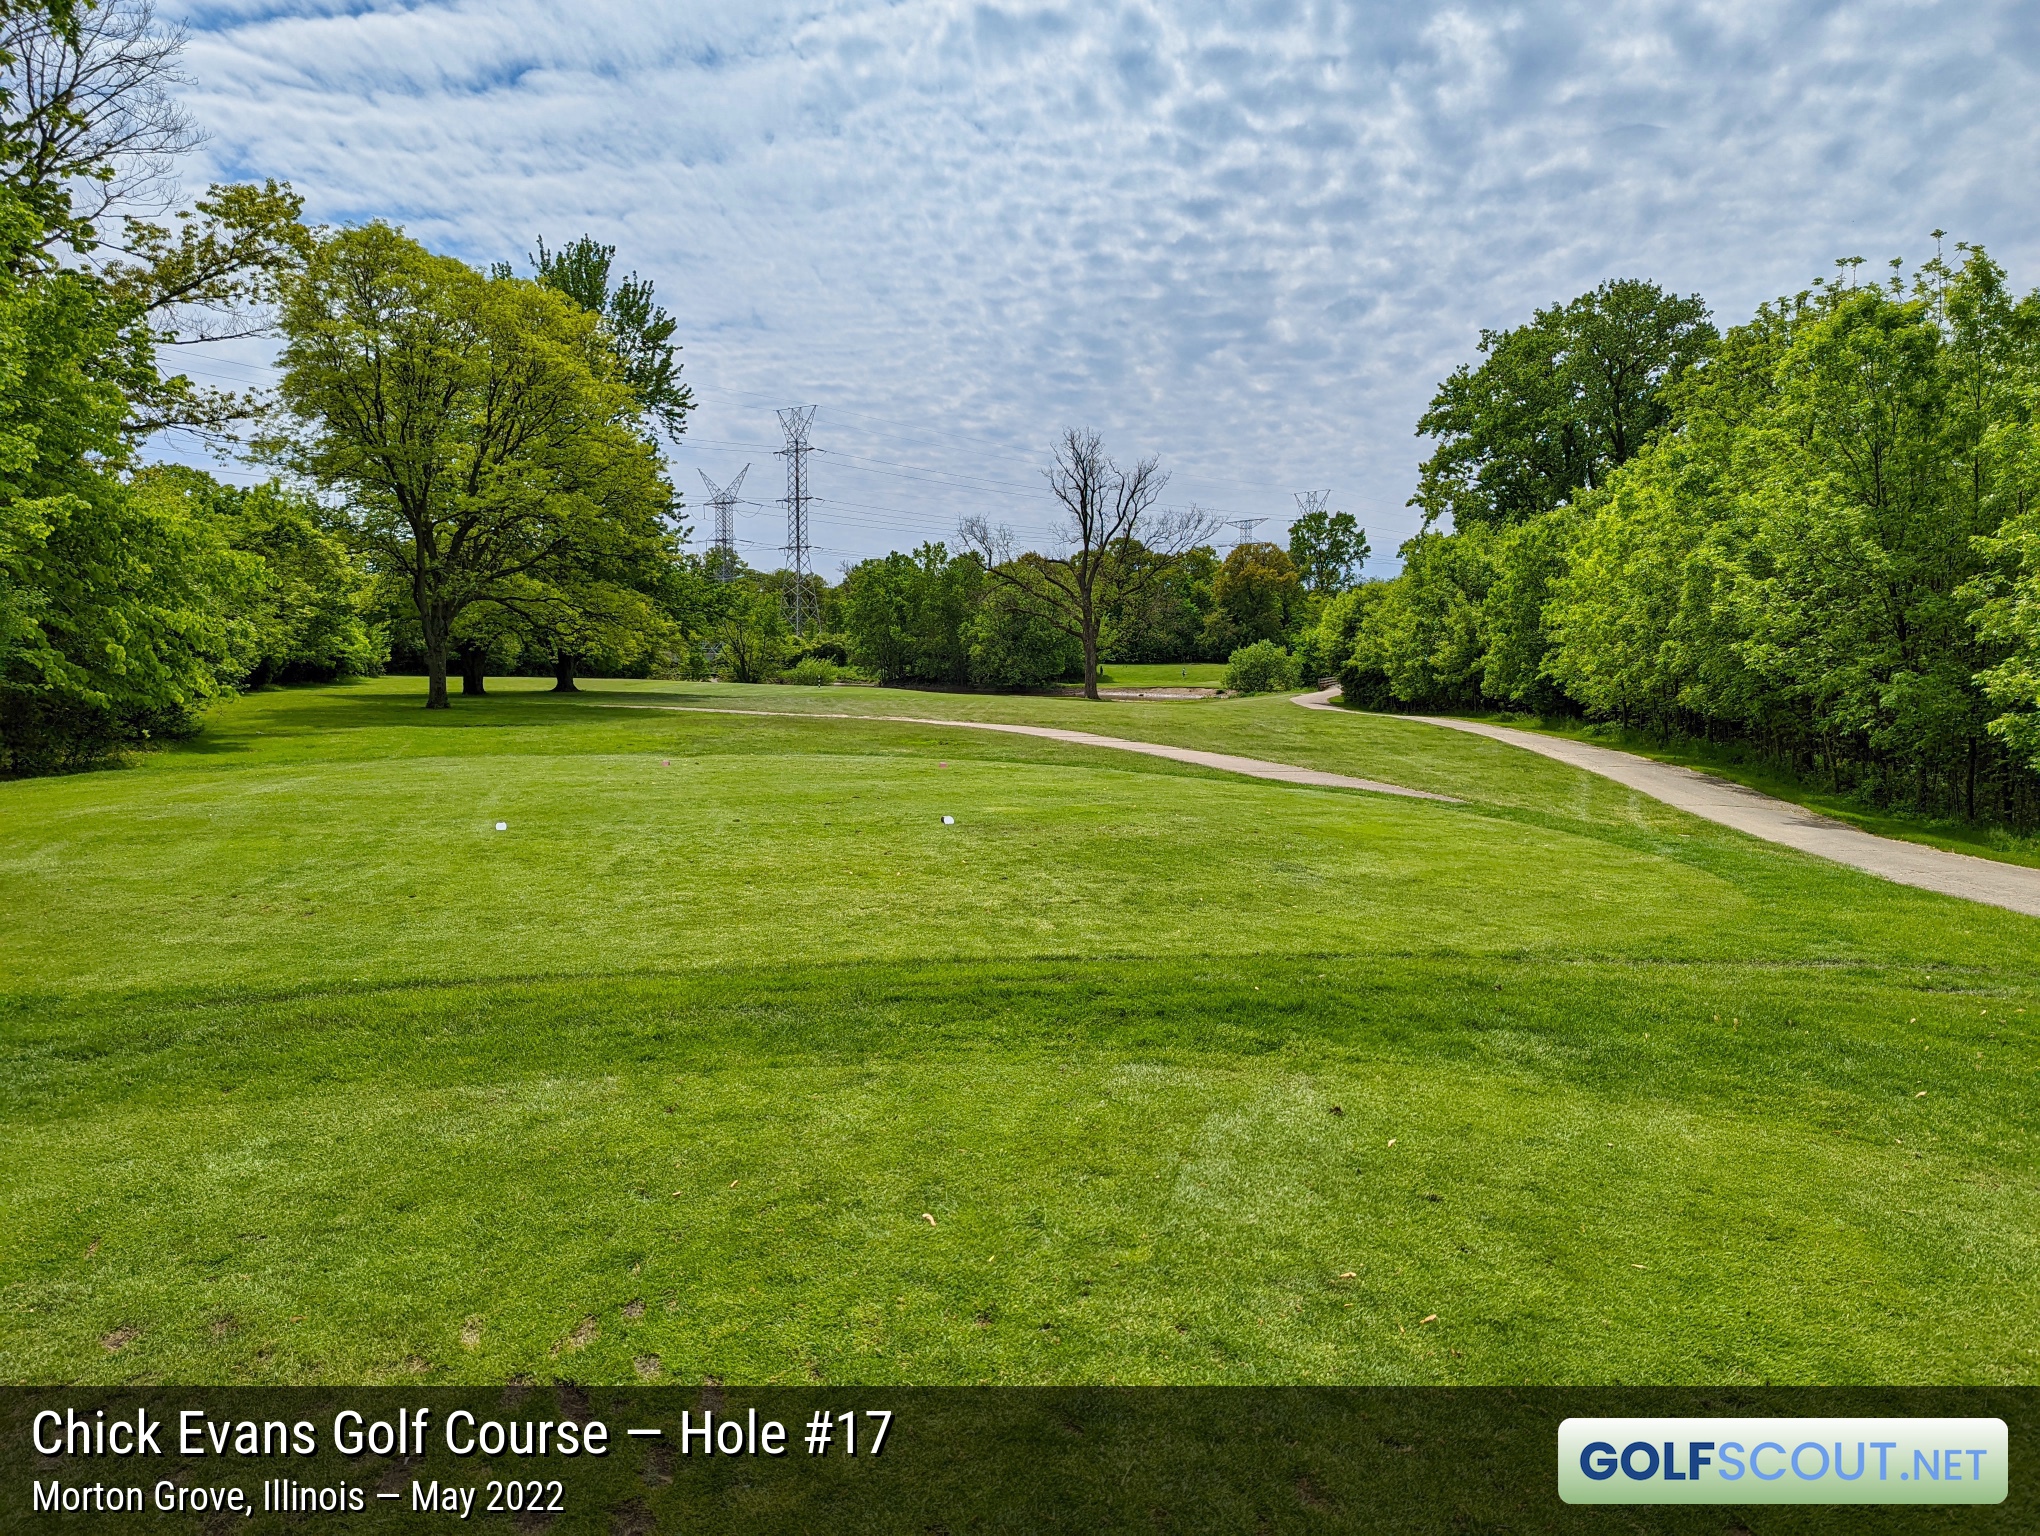 Photo of hole #17 at Chick Evans Golf Course in Morton Grove, Illinois. 